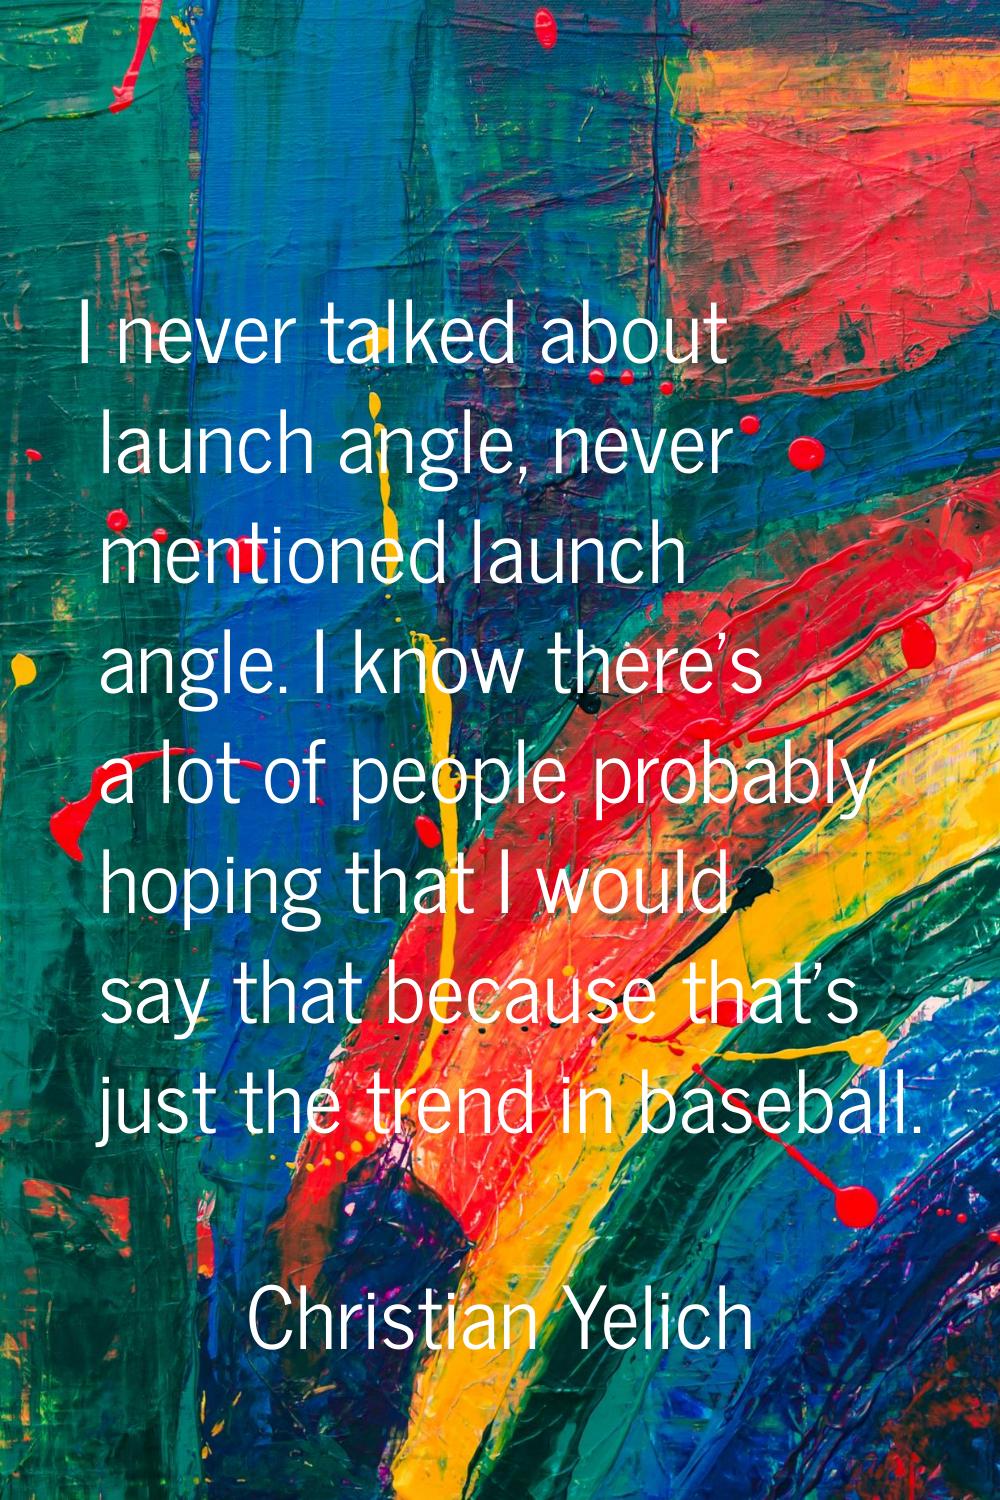 I never talked about launch angle, never mentioned launch angle. I know there's a lot of people pro